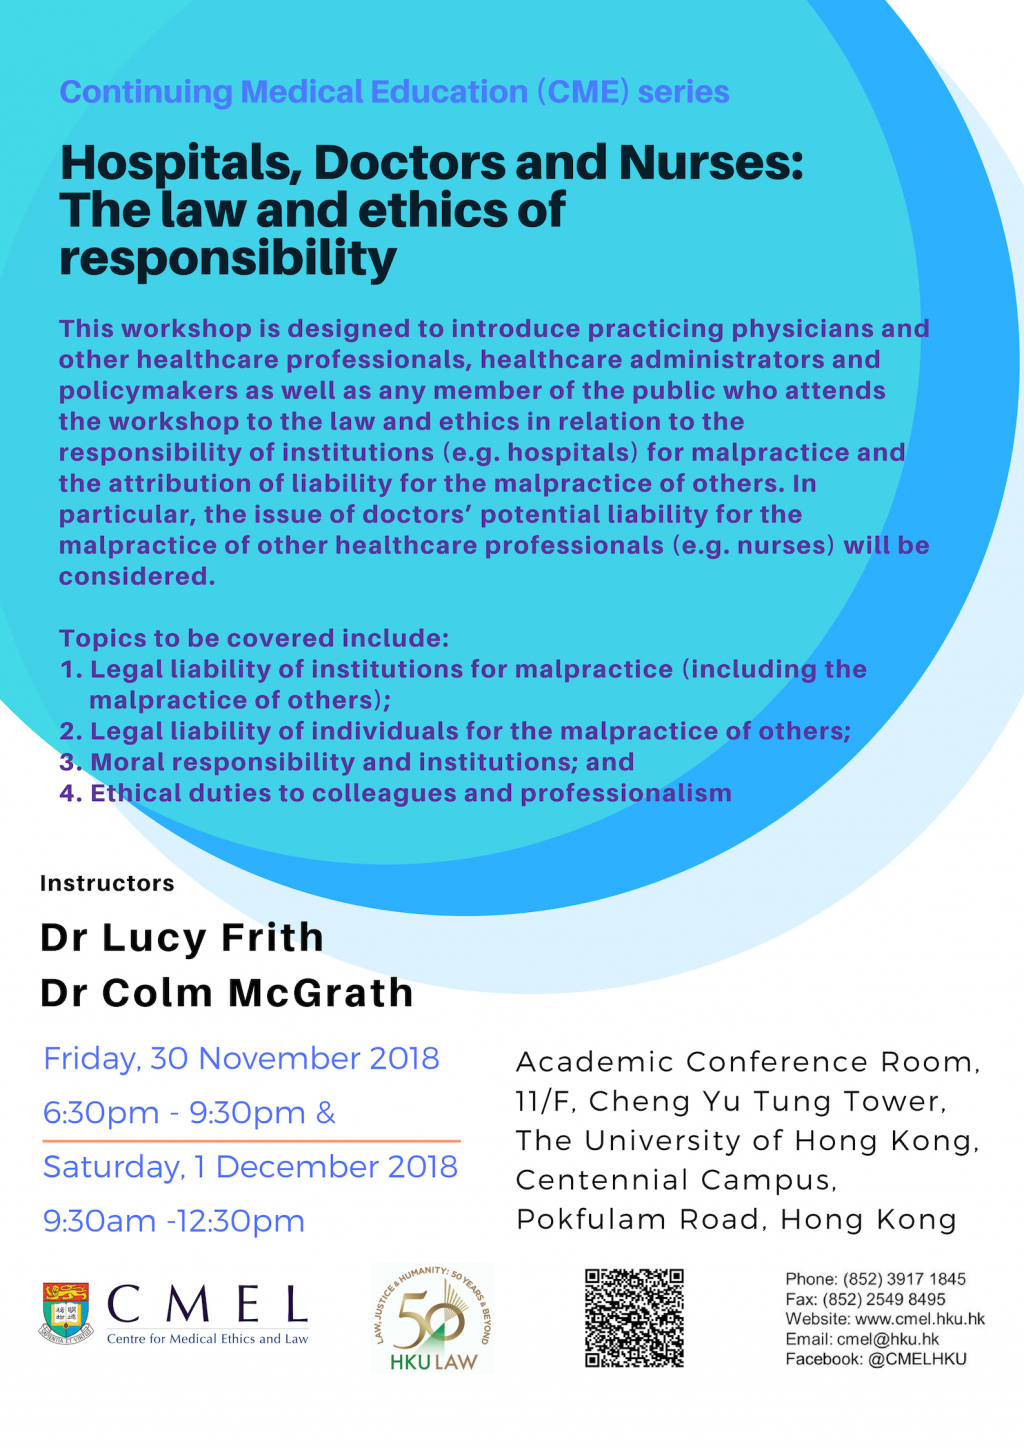 Hospitals, Doctors and Nurses: The law and ethics of responsibility(on 30 November and 1 December 2018)